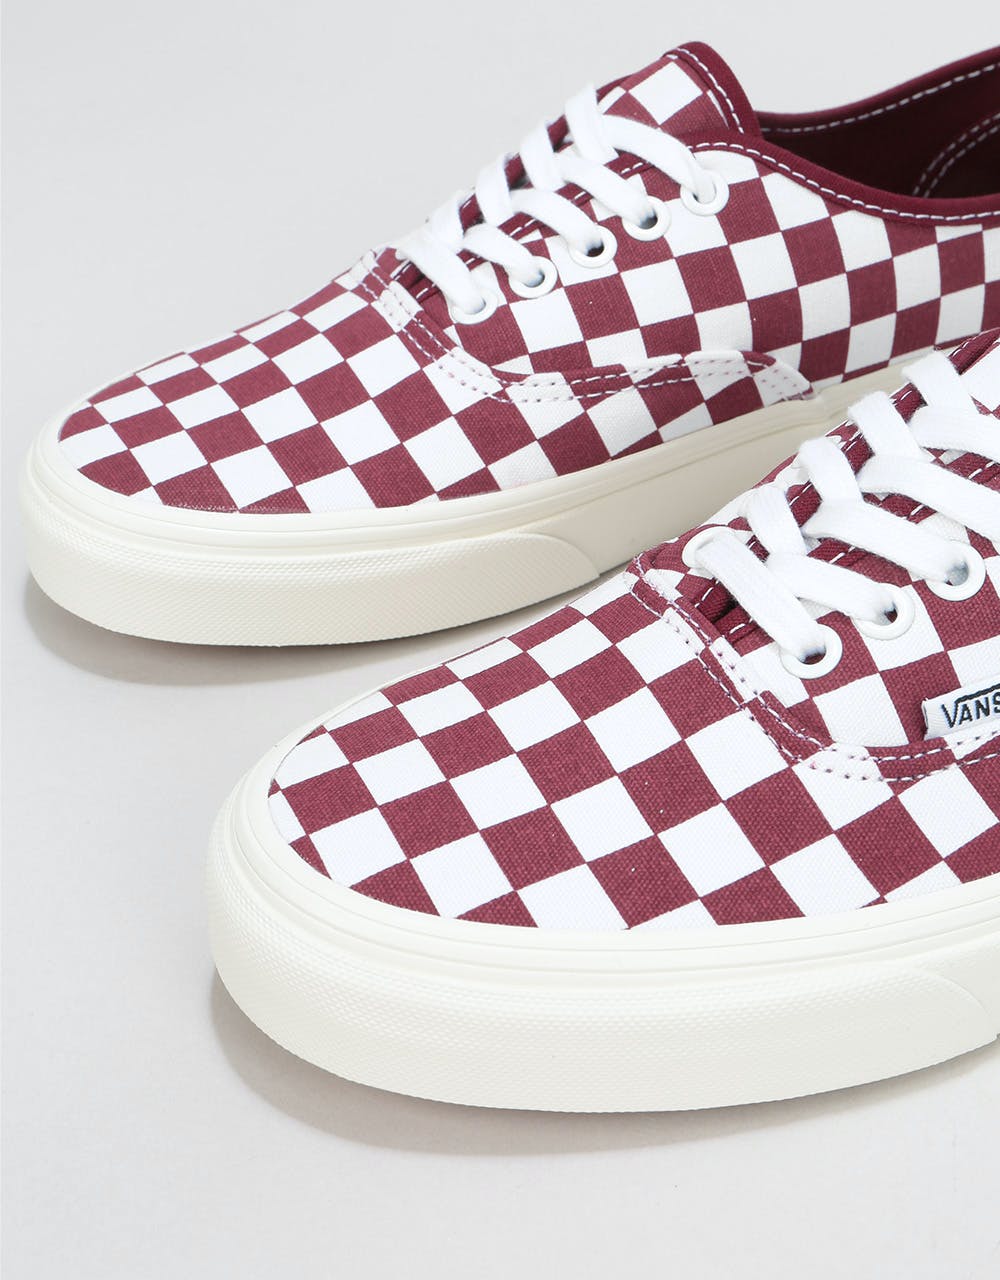 Vans Authentic Skate Shoes - (Checkerboard) Port Royale/Marshmallow